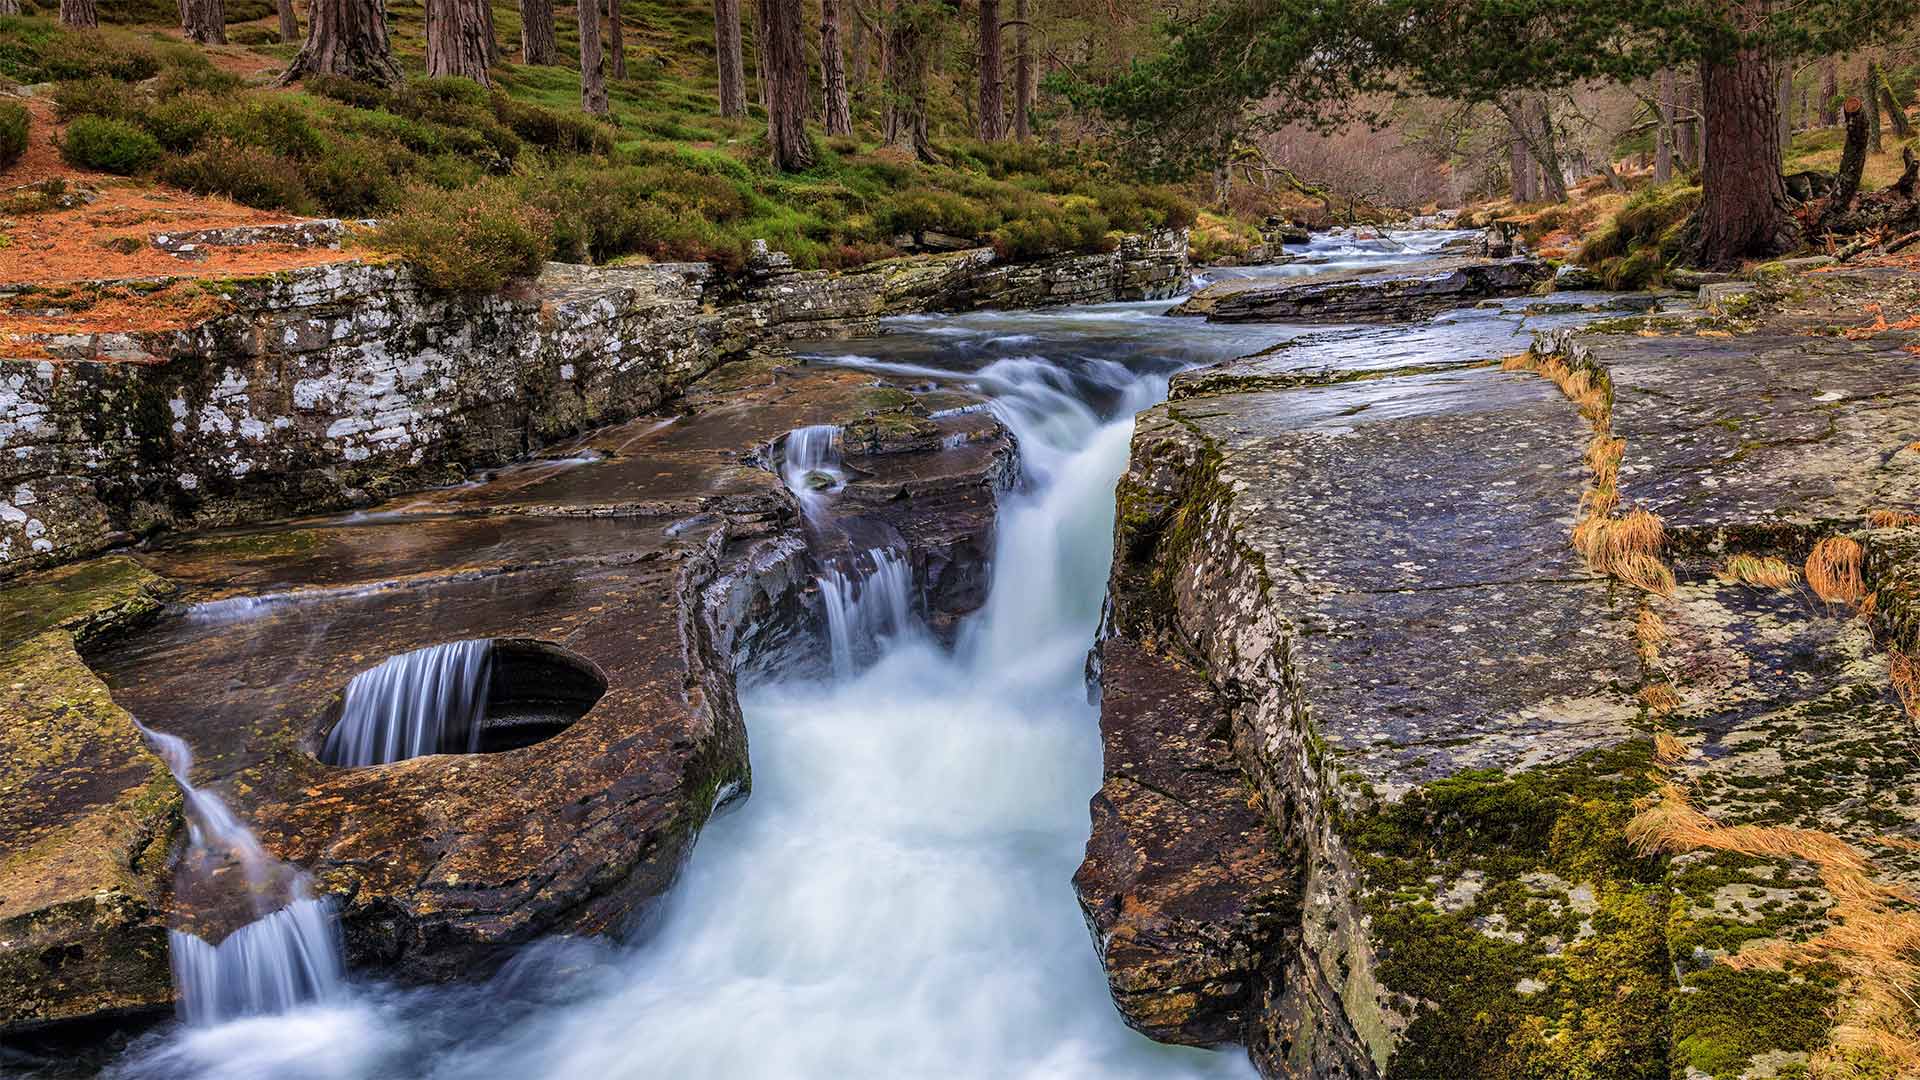 The Punch Bowl on the River Quoich in the Cairngorms, Aberdeenshire, Scotland - AWL Images/Danita Delimont)